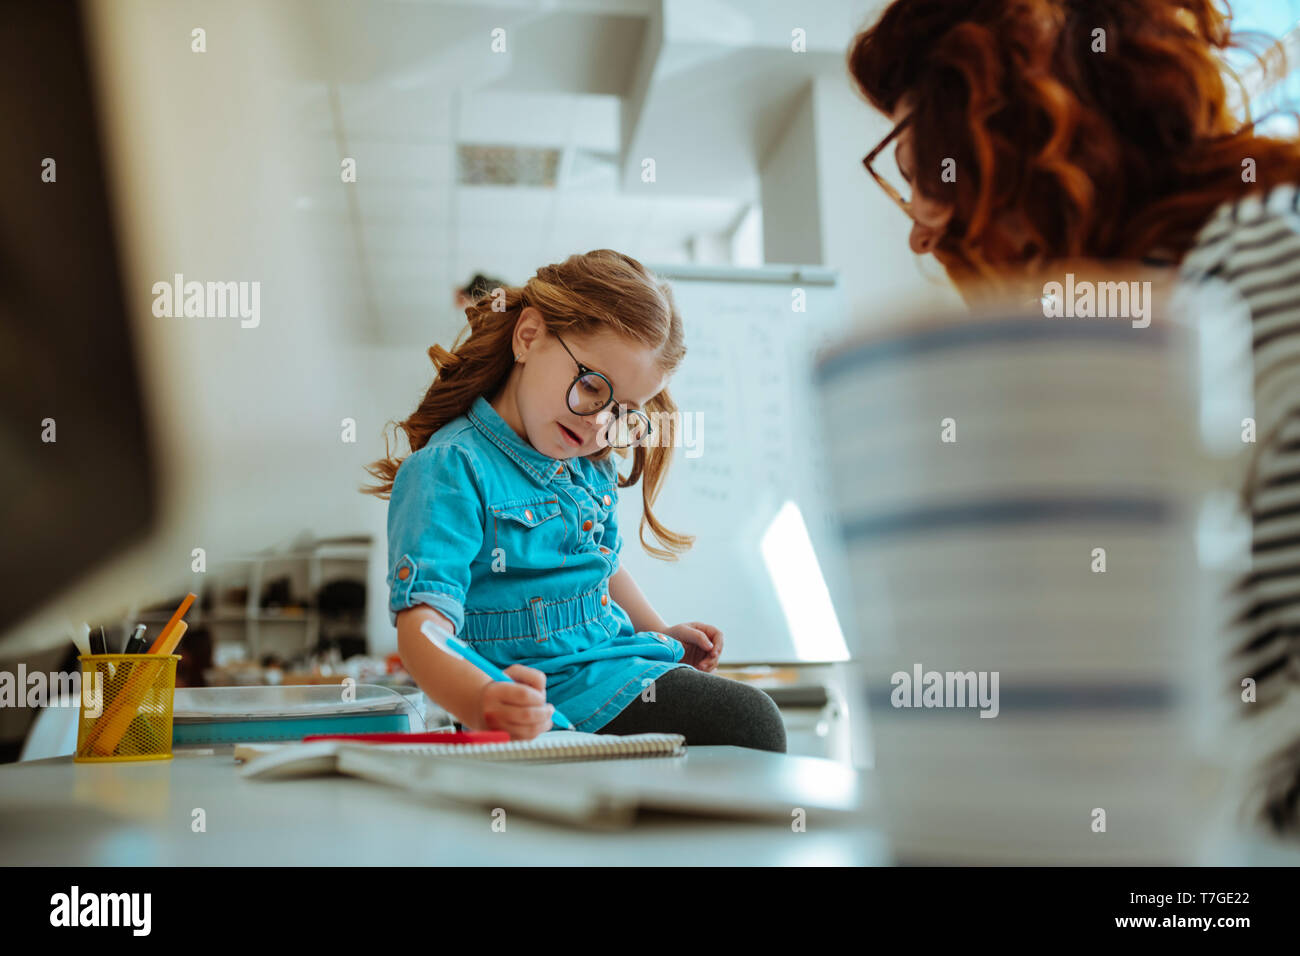 Girl wearing denim dress painting on working table of mother Stock Photo